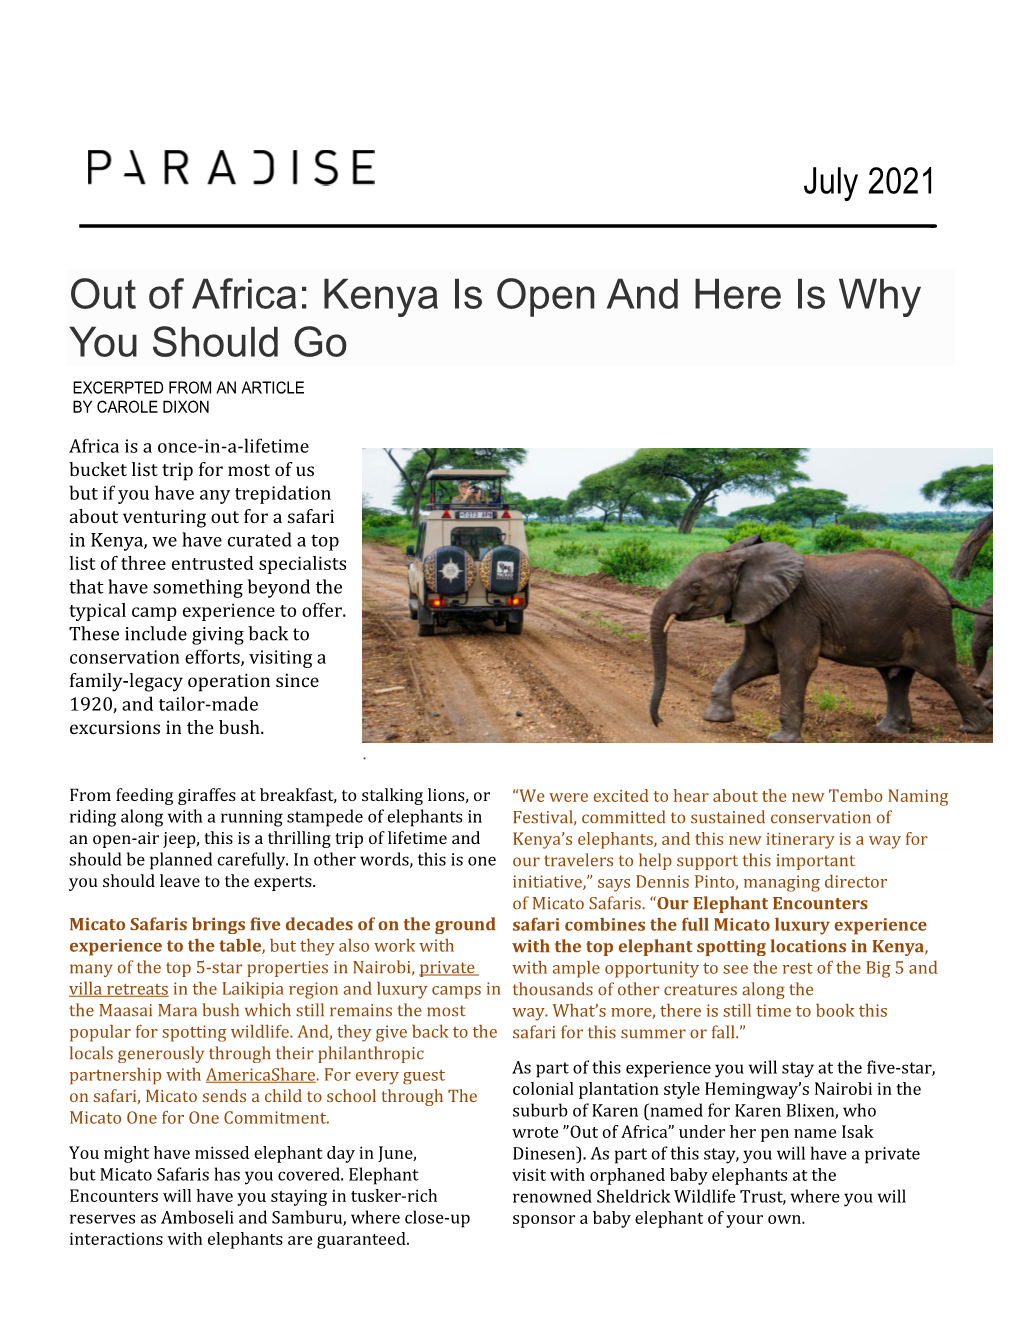 Out of Africa: Kenya Is Open and Here Is Why You Should Go